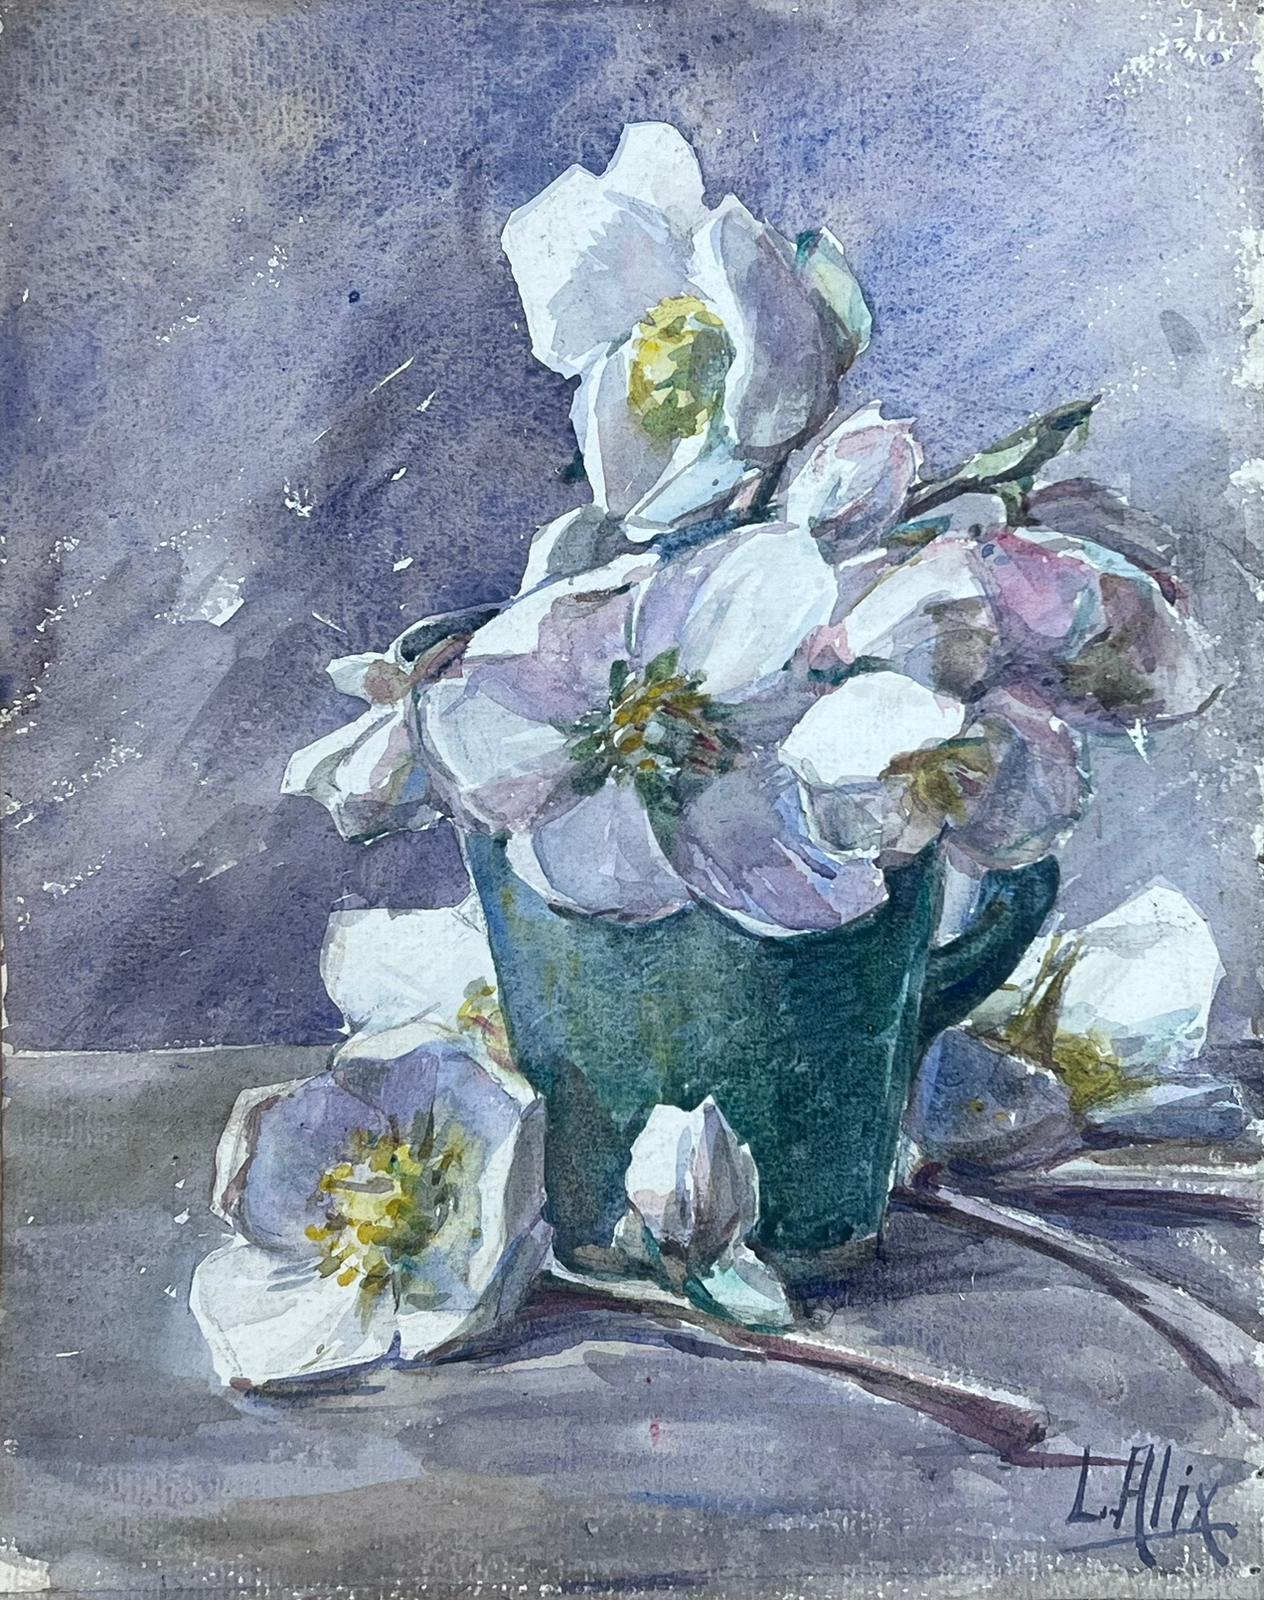 White Flower Still Life
by Louise Alix, French 1950's Impressionist 
watercolour on artist paper
painting: 10.75 x 11 inches
double sided 
provenance: from a large private collection of this artists work in Northern France
condition: original, good